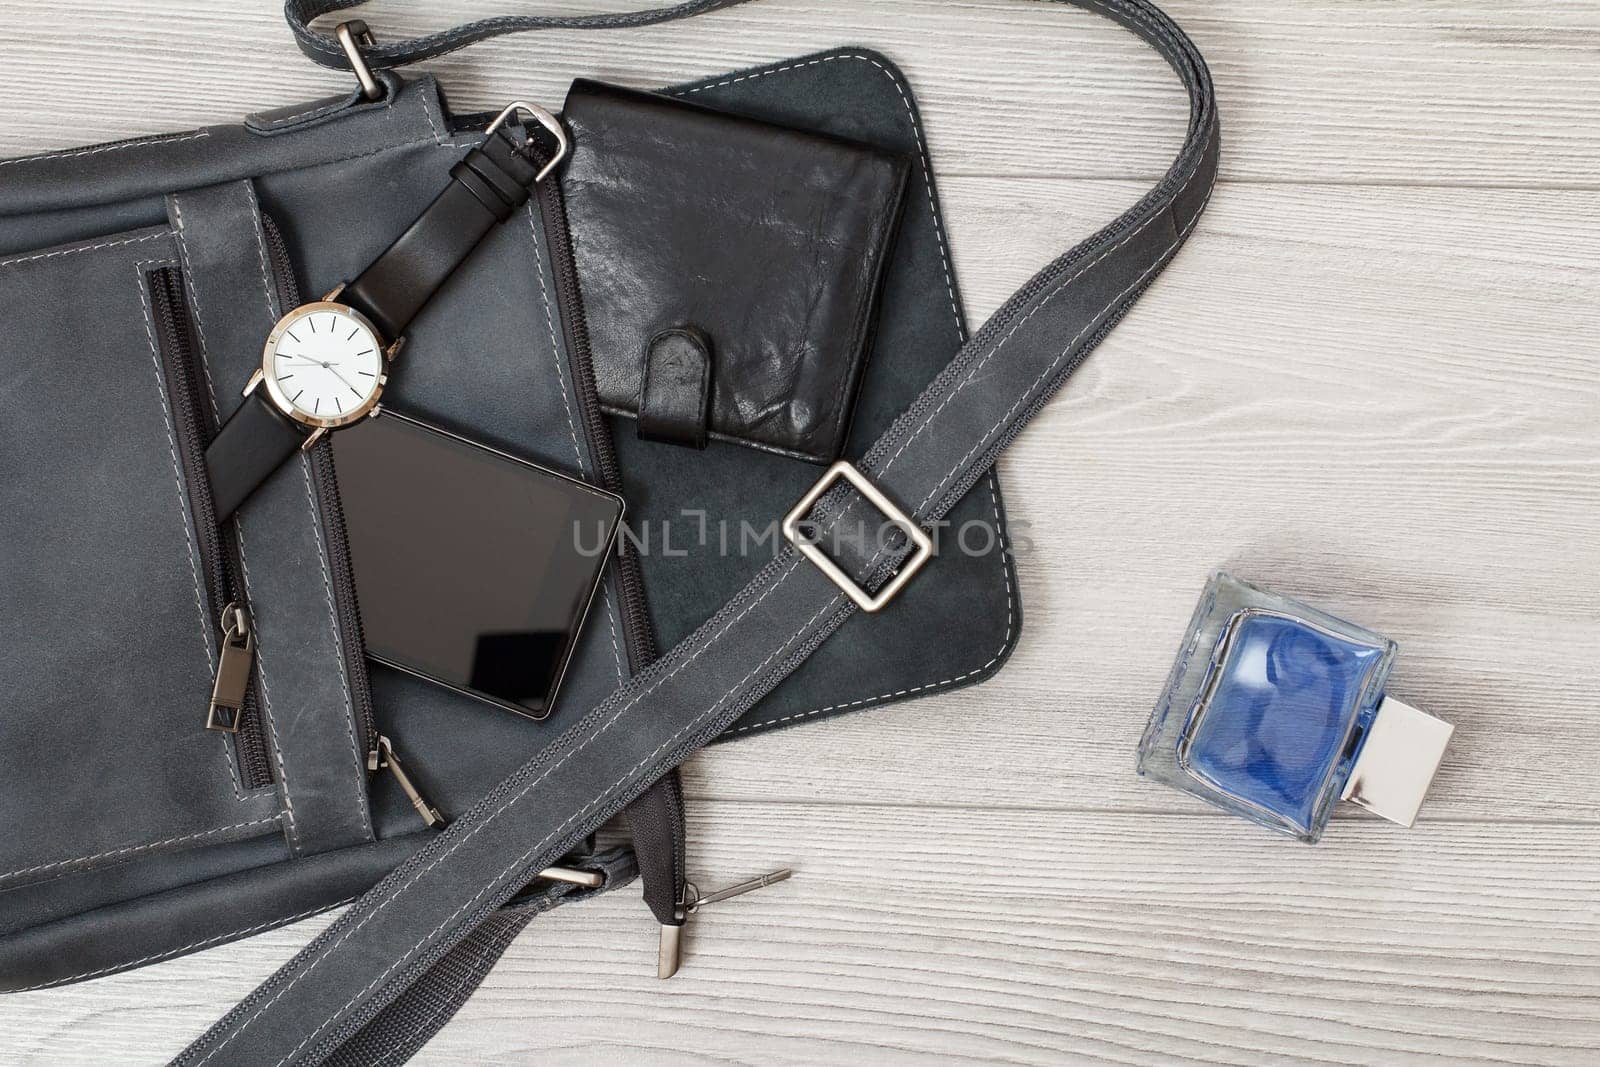 Leather shoulder bag for men with mobile phone, watch and wallet on it, men's cologne on gray wooden background. Men's accessories. Top view.